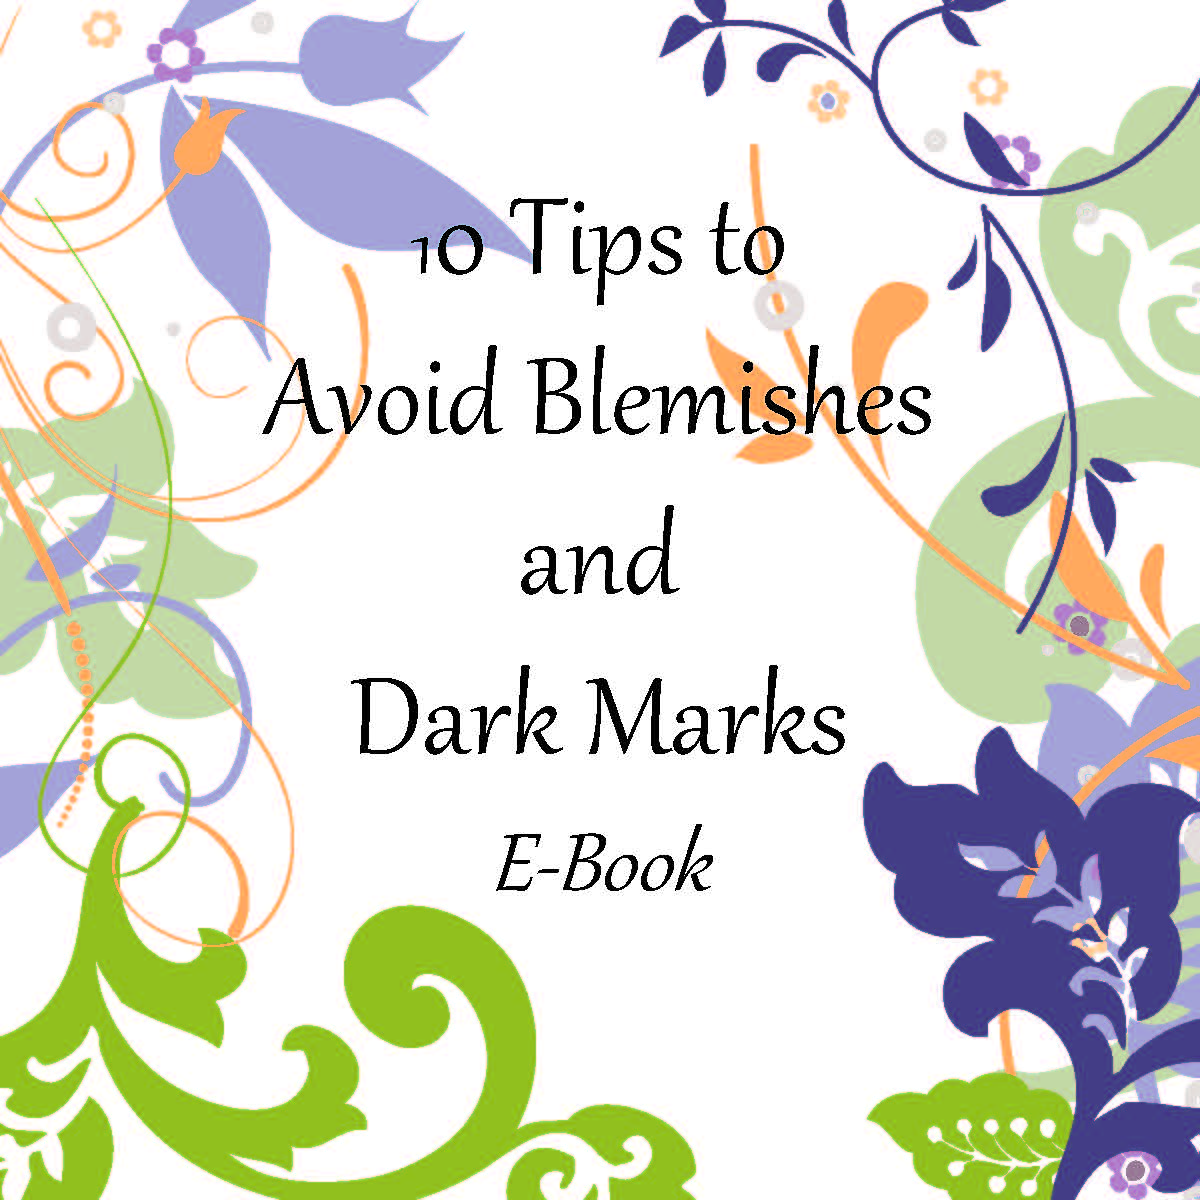 Free E-Book - 10 Tips to Avoid Blemishes and Dark Marks